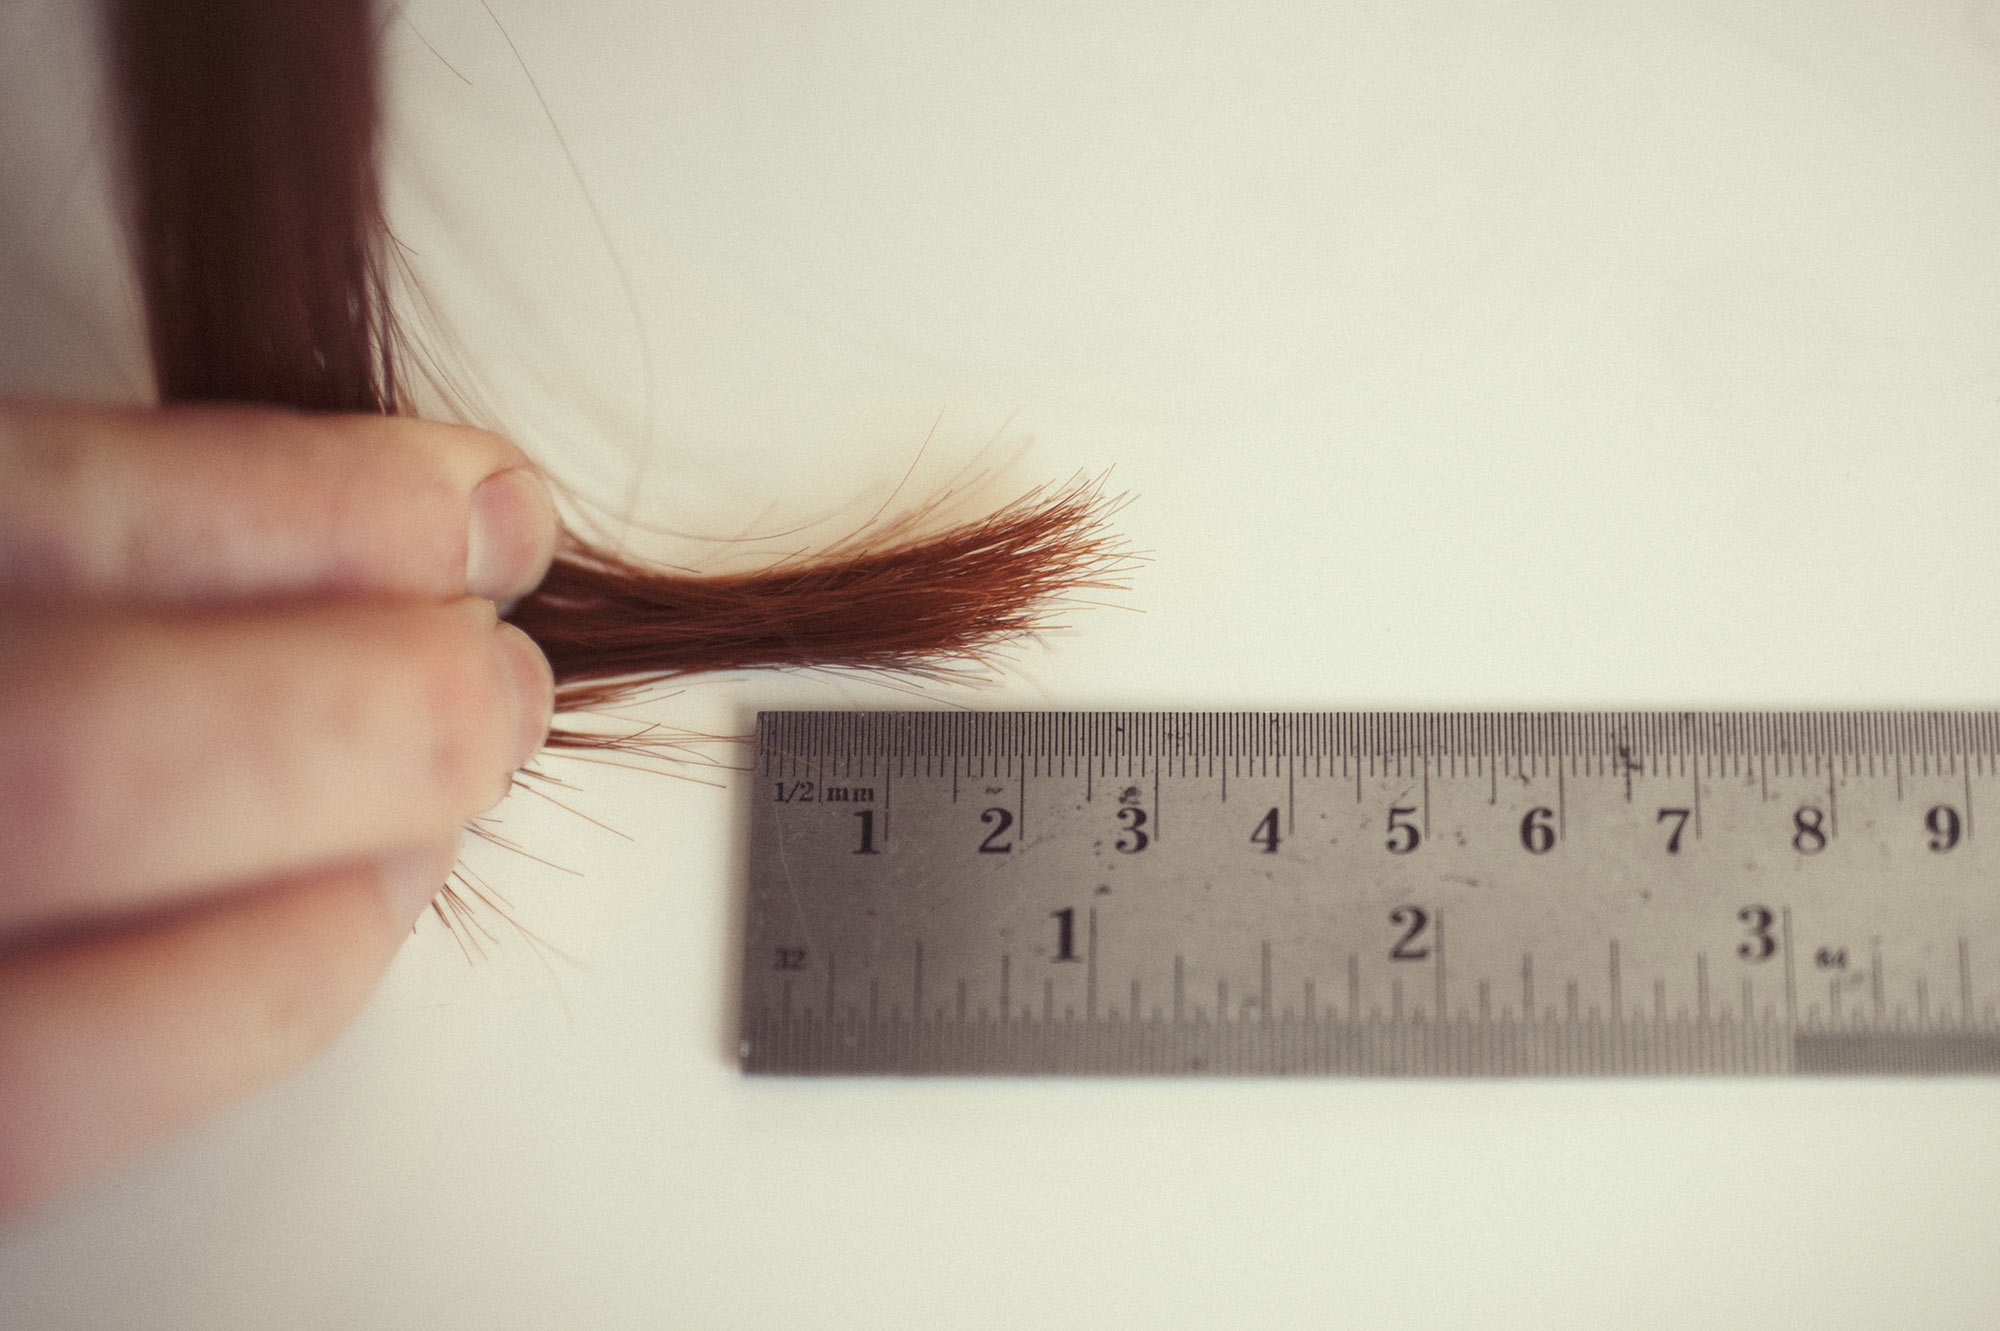 Naturopath Lisa Fitzgibbon displays her red hair against a ruler to indicate how much hair is required for testing